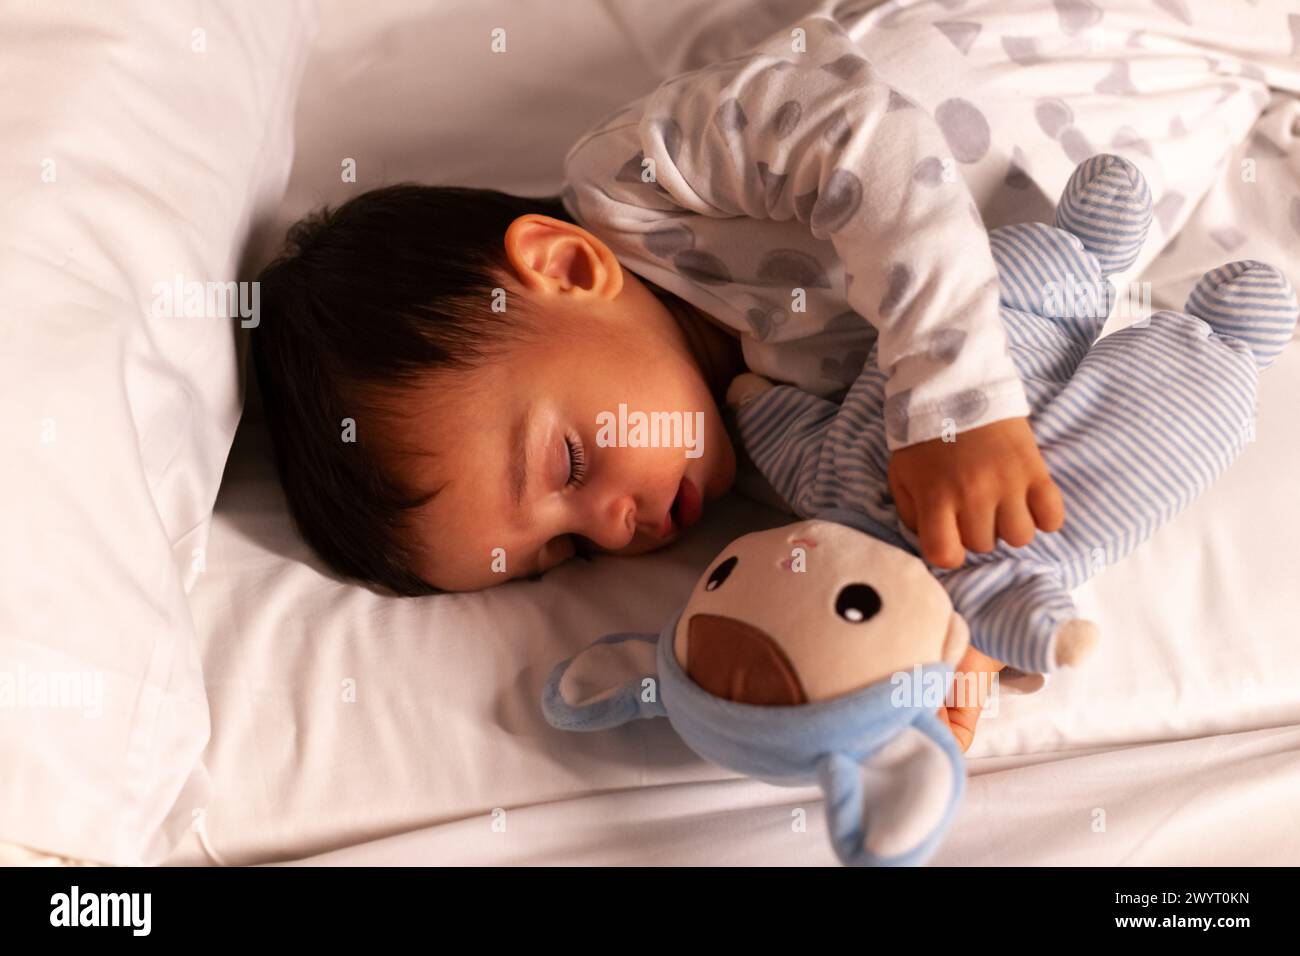 Baby sleeping with mouth open and cuddling teddy bear in bed Stock Photo